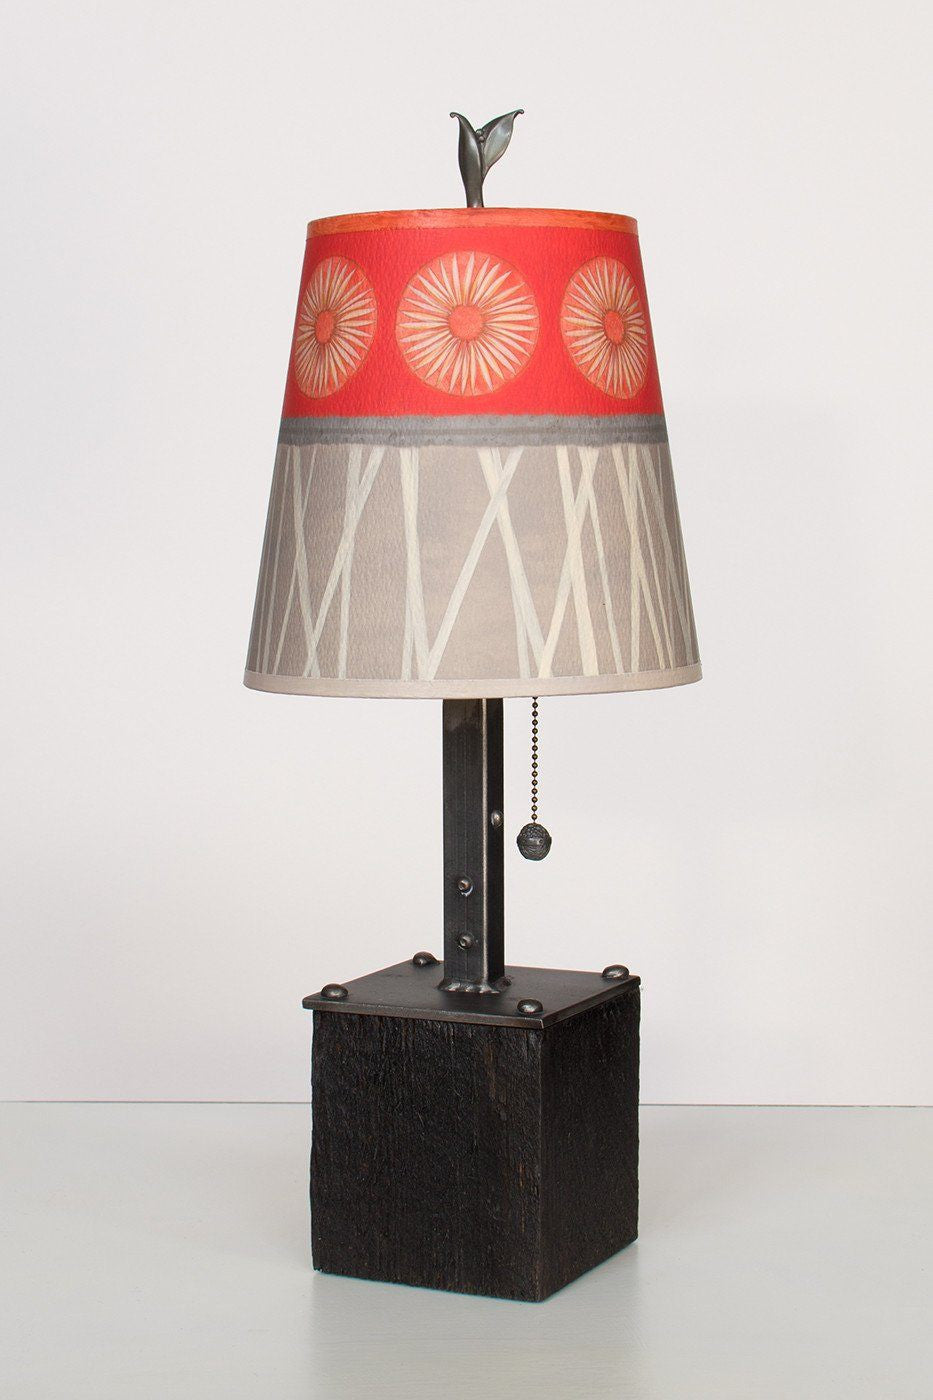 Steel Table Lamp on Reclaimed Wood with Small Drum Shade in Tang